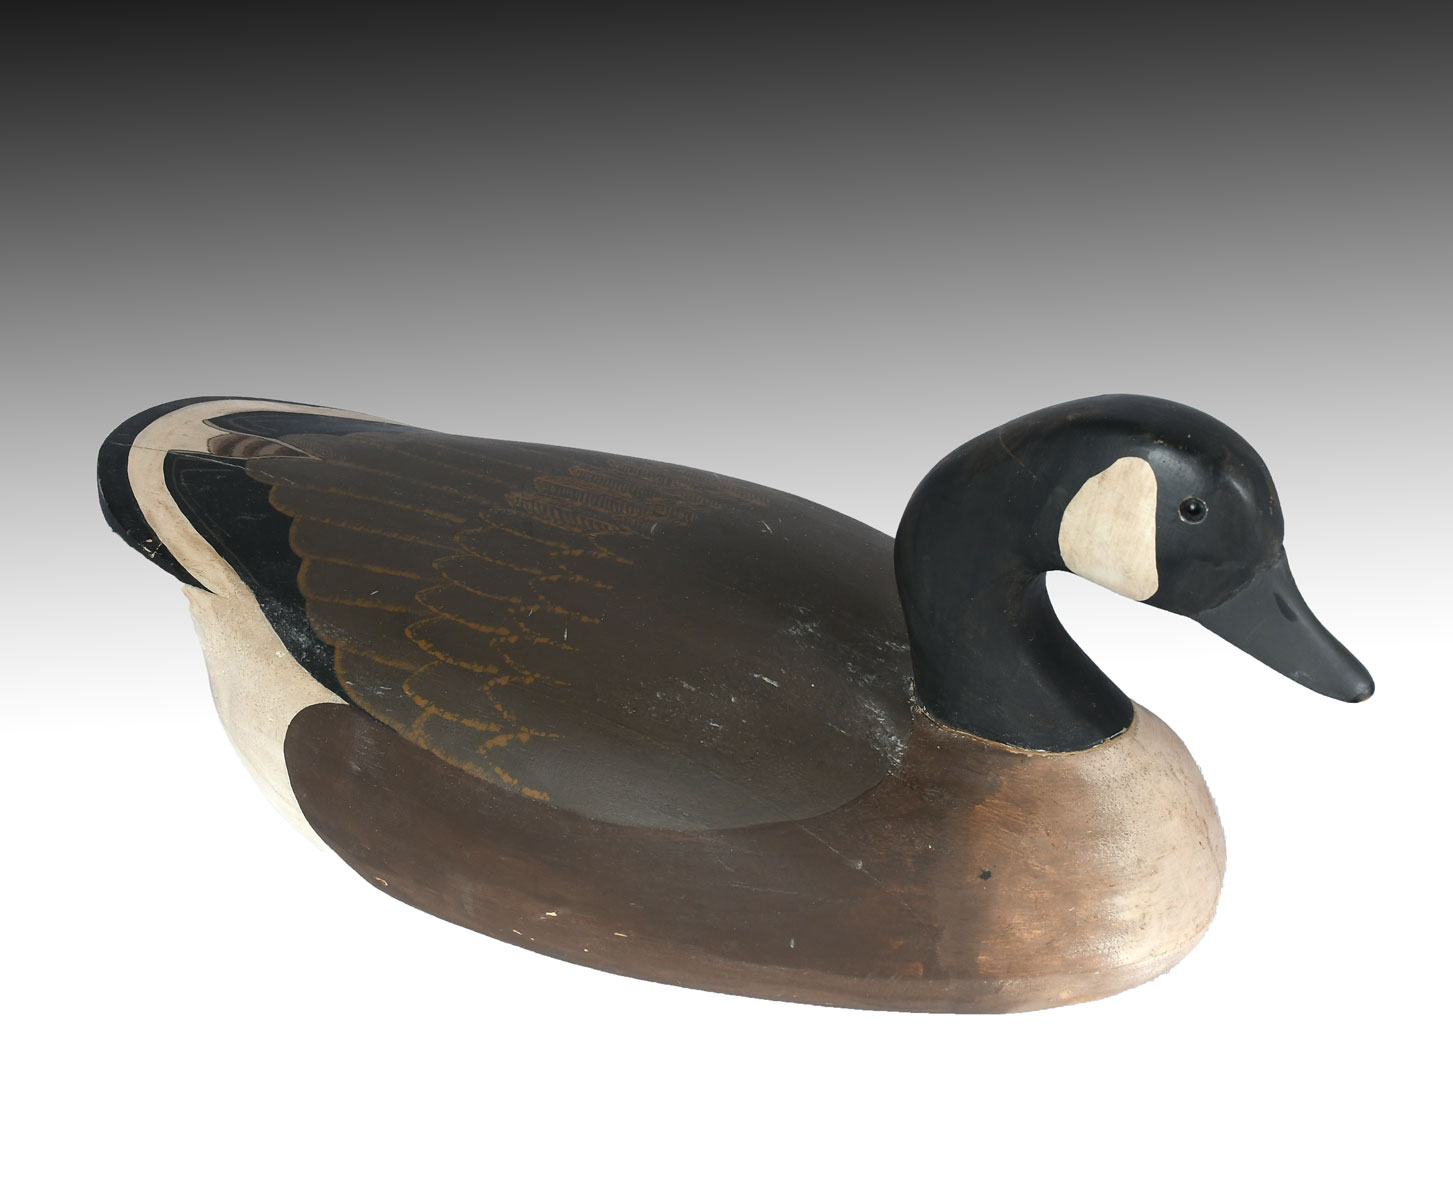 CANADIAN GOOSE WILDFOLWER DECOY 36cb8c